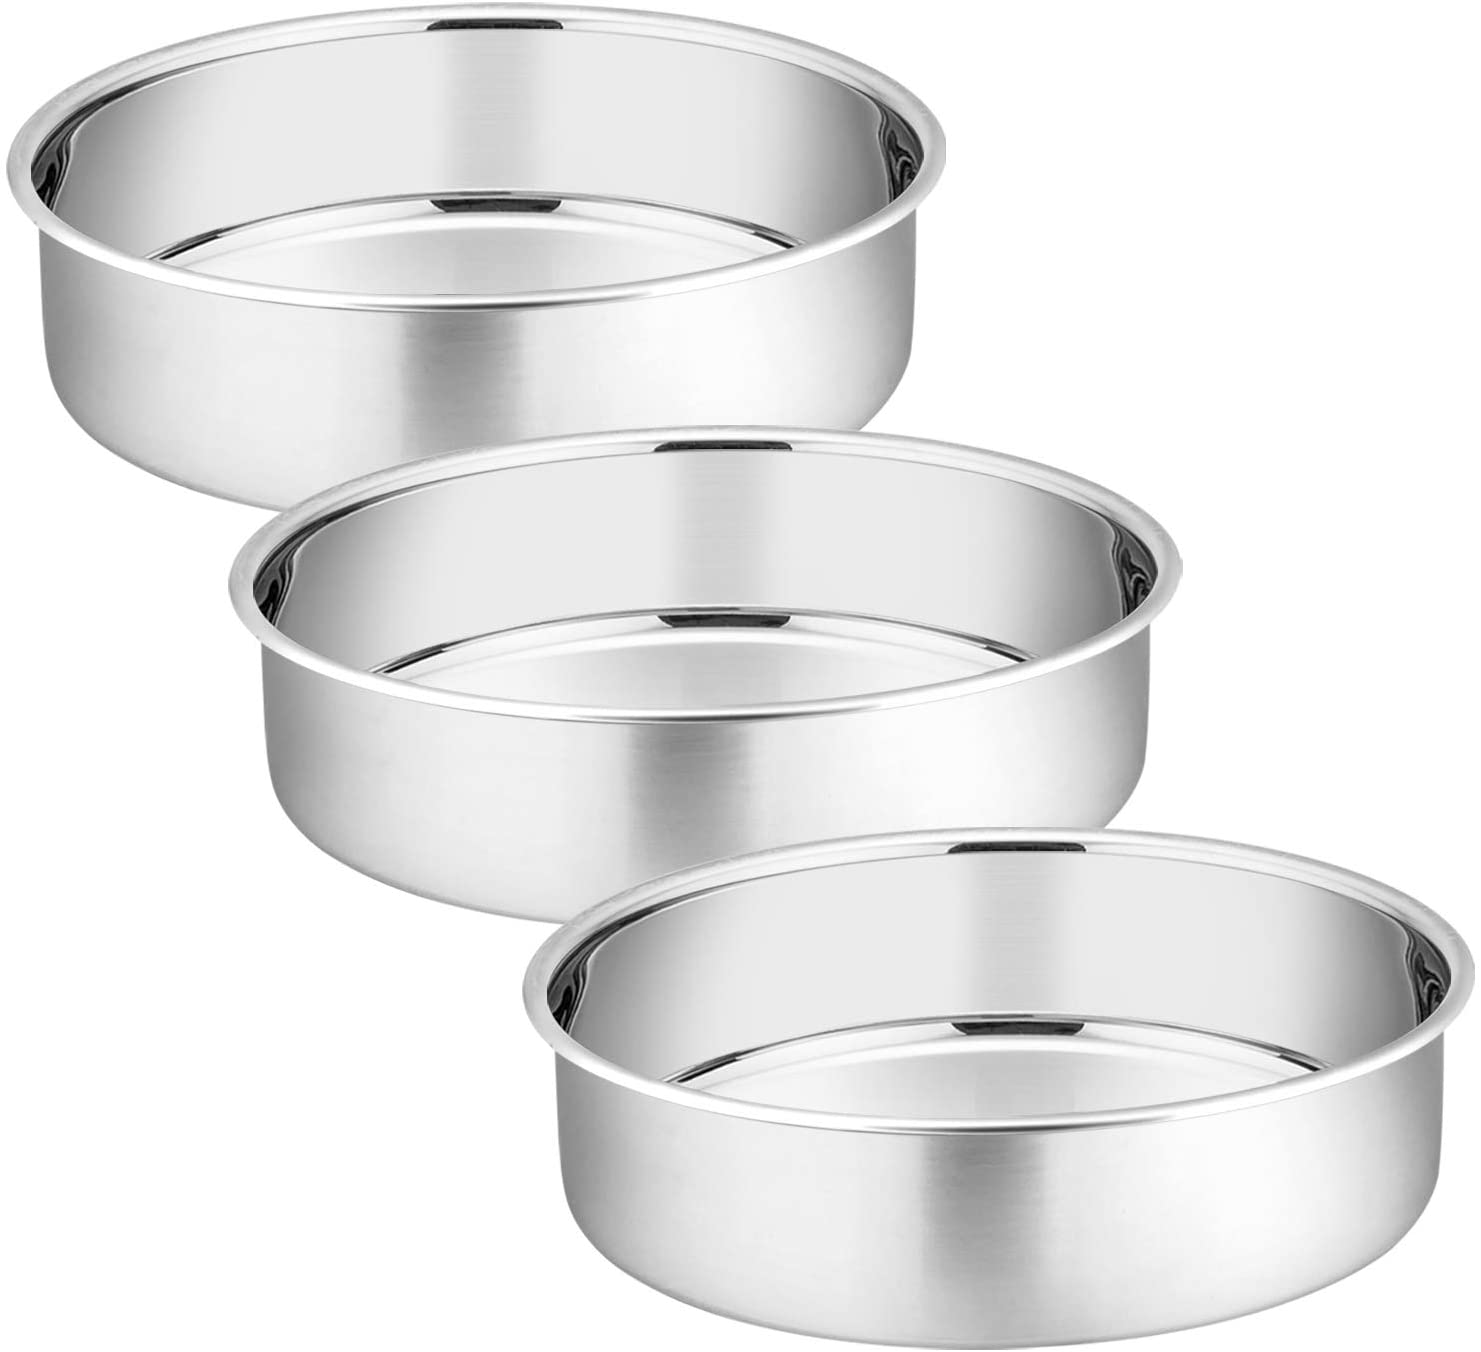 P&P CHEF Nonstick 8 Inch Cake Pans with Handles Set of 3 Round